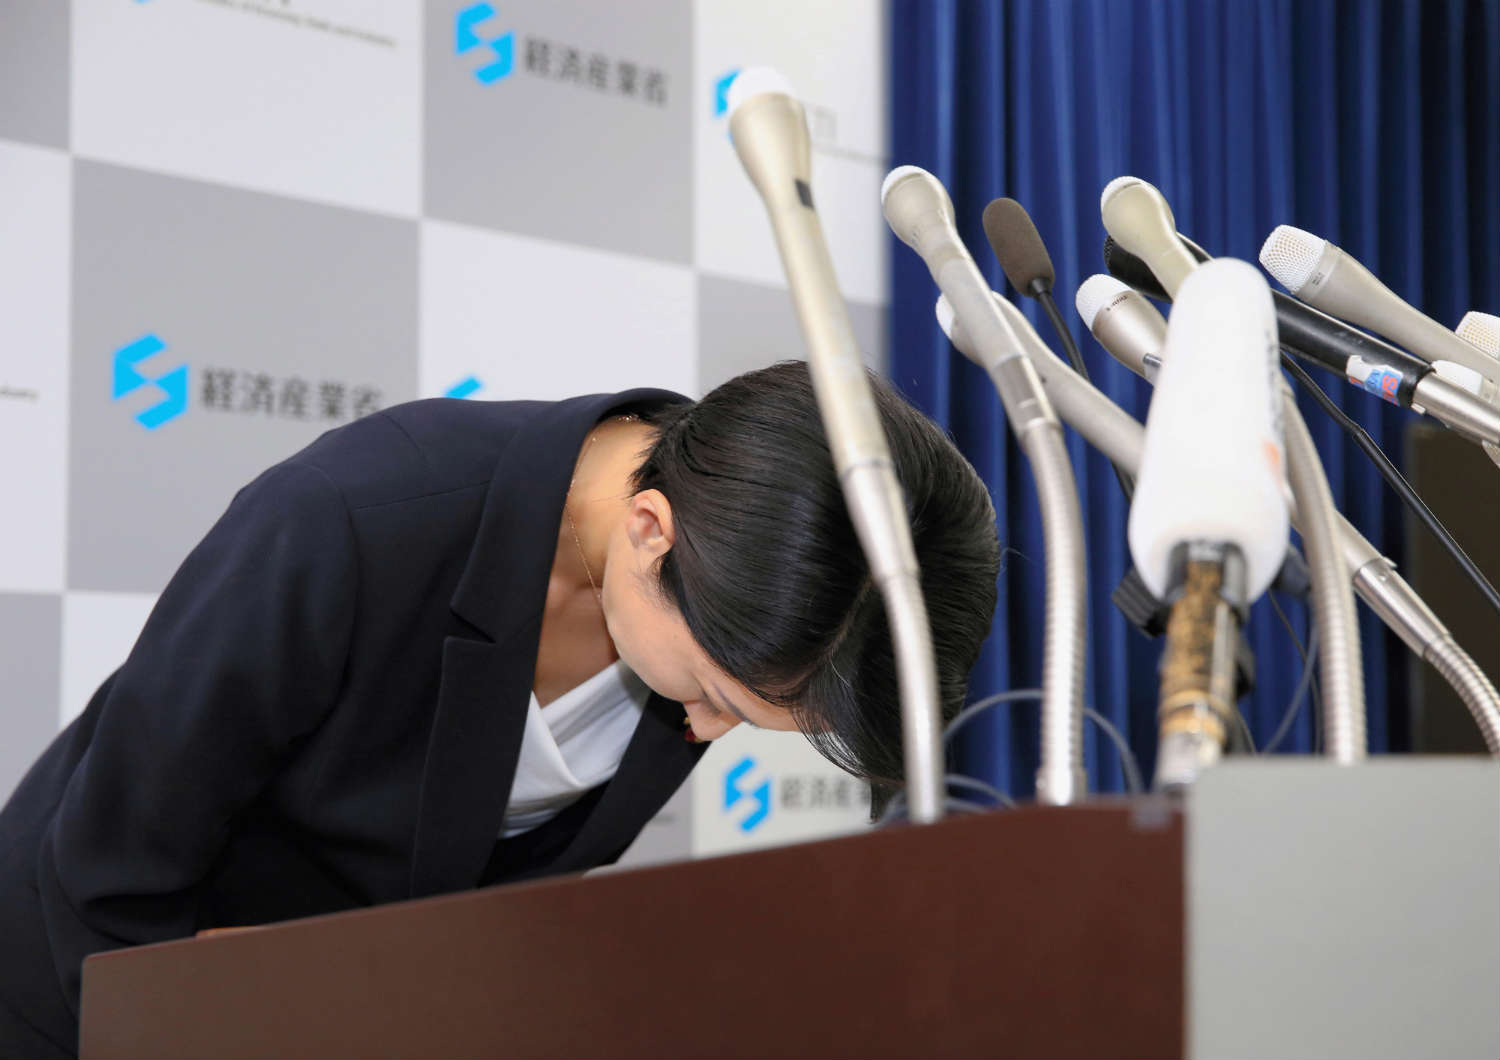 Japanese Trade and Industry Minister Yuko Obuchi resigned on Oct. 20 amid allegations of misusing election funds (Photo by The Asahi Shimbun via Getty Images)